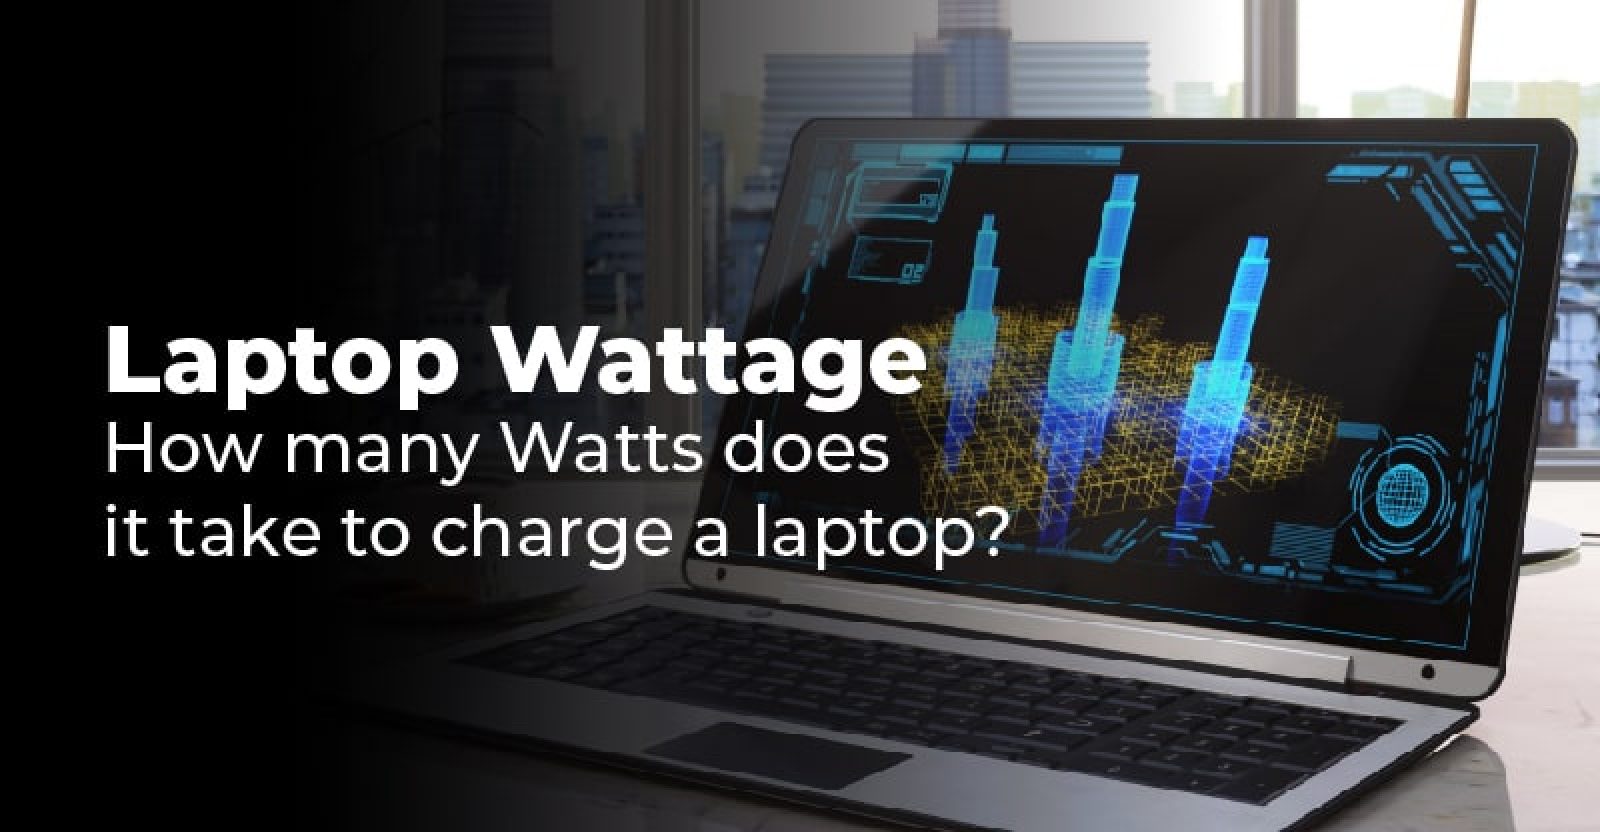 Laptop Wattage How many Watts does it take to charge a laptop?